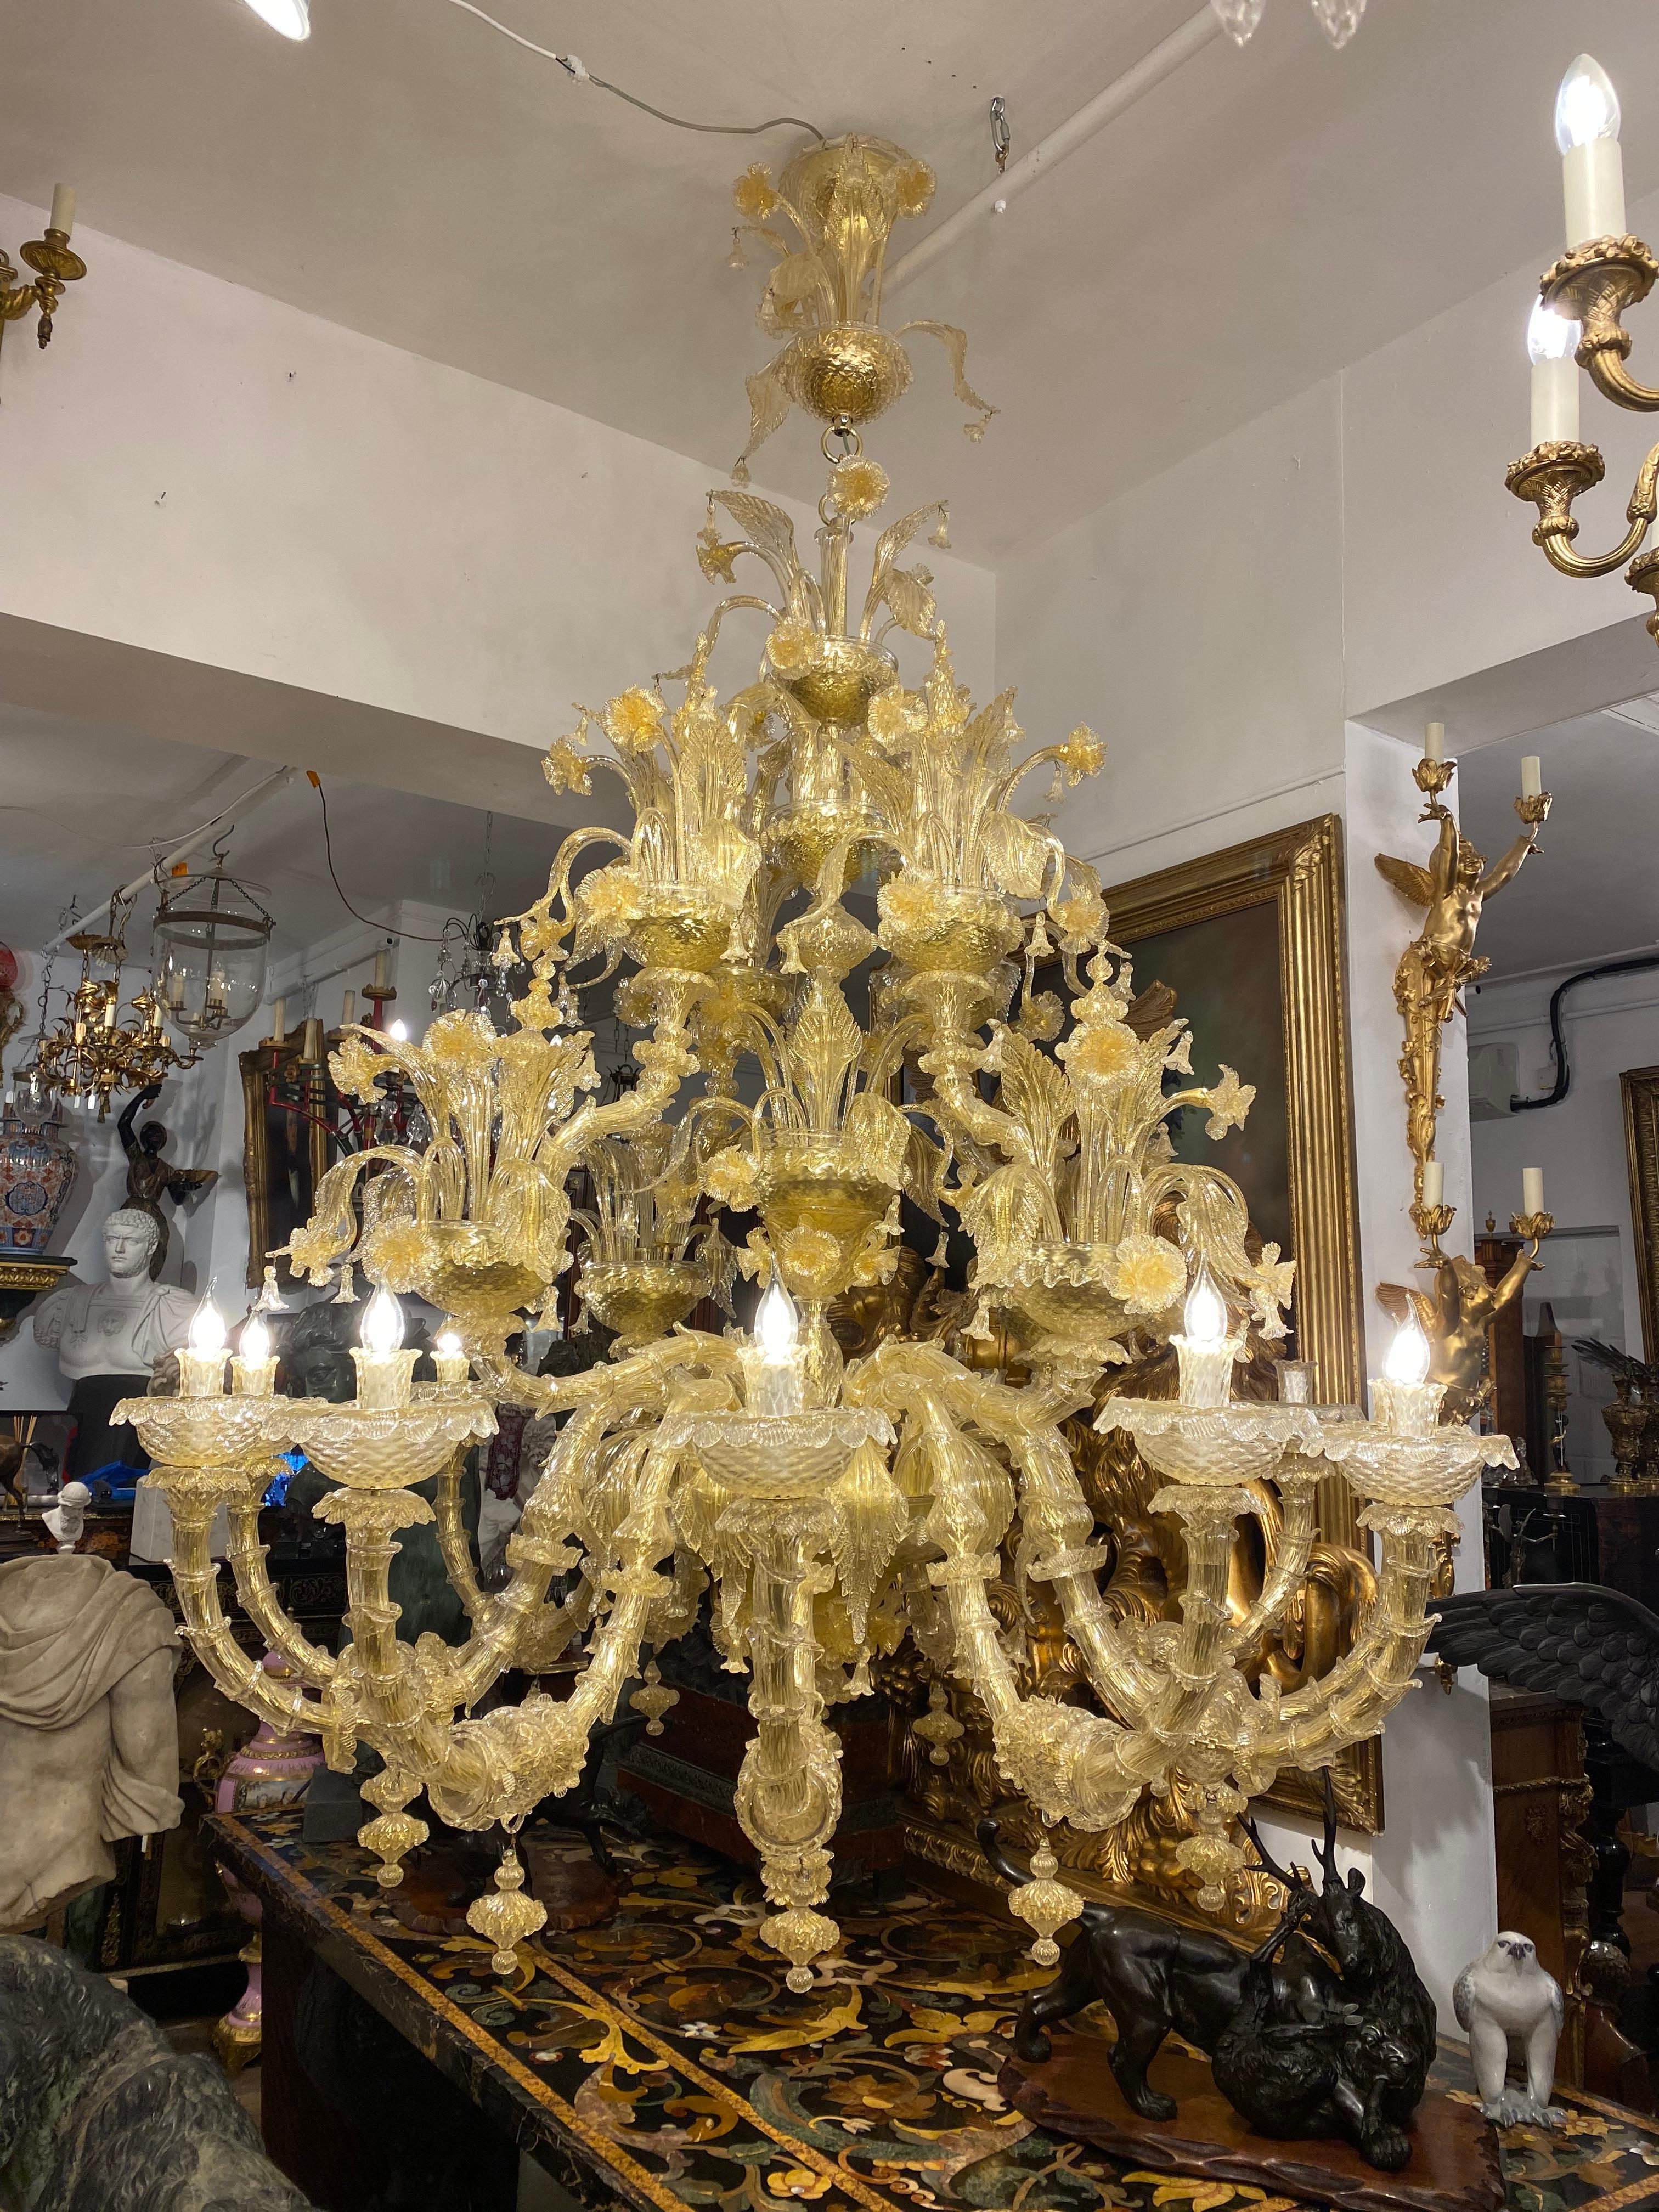 An incredible and monumental Italian 19th century Murano large chandelier. This is truly a magnificent chandelier, produced by the greatest Italian glass manufacturer in the world. With a bulbous central stem supporting floral decorated lights,